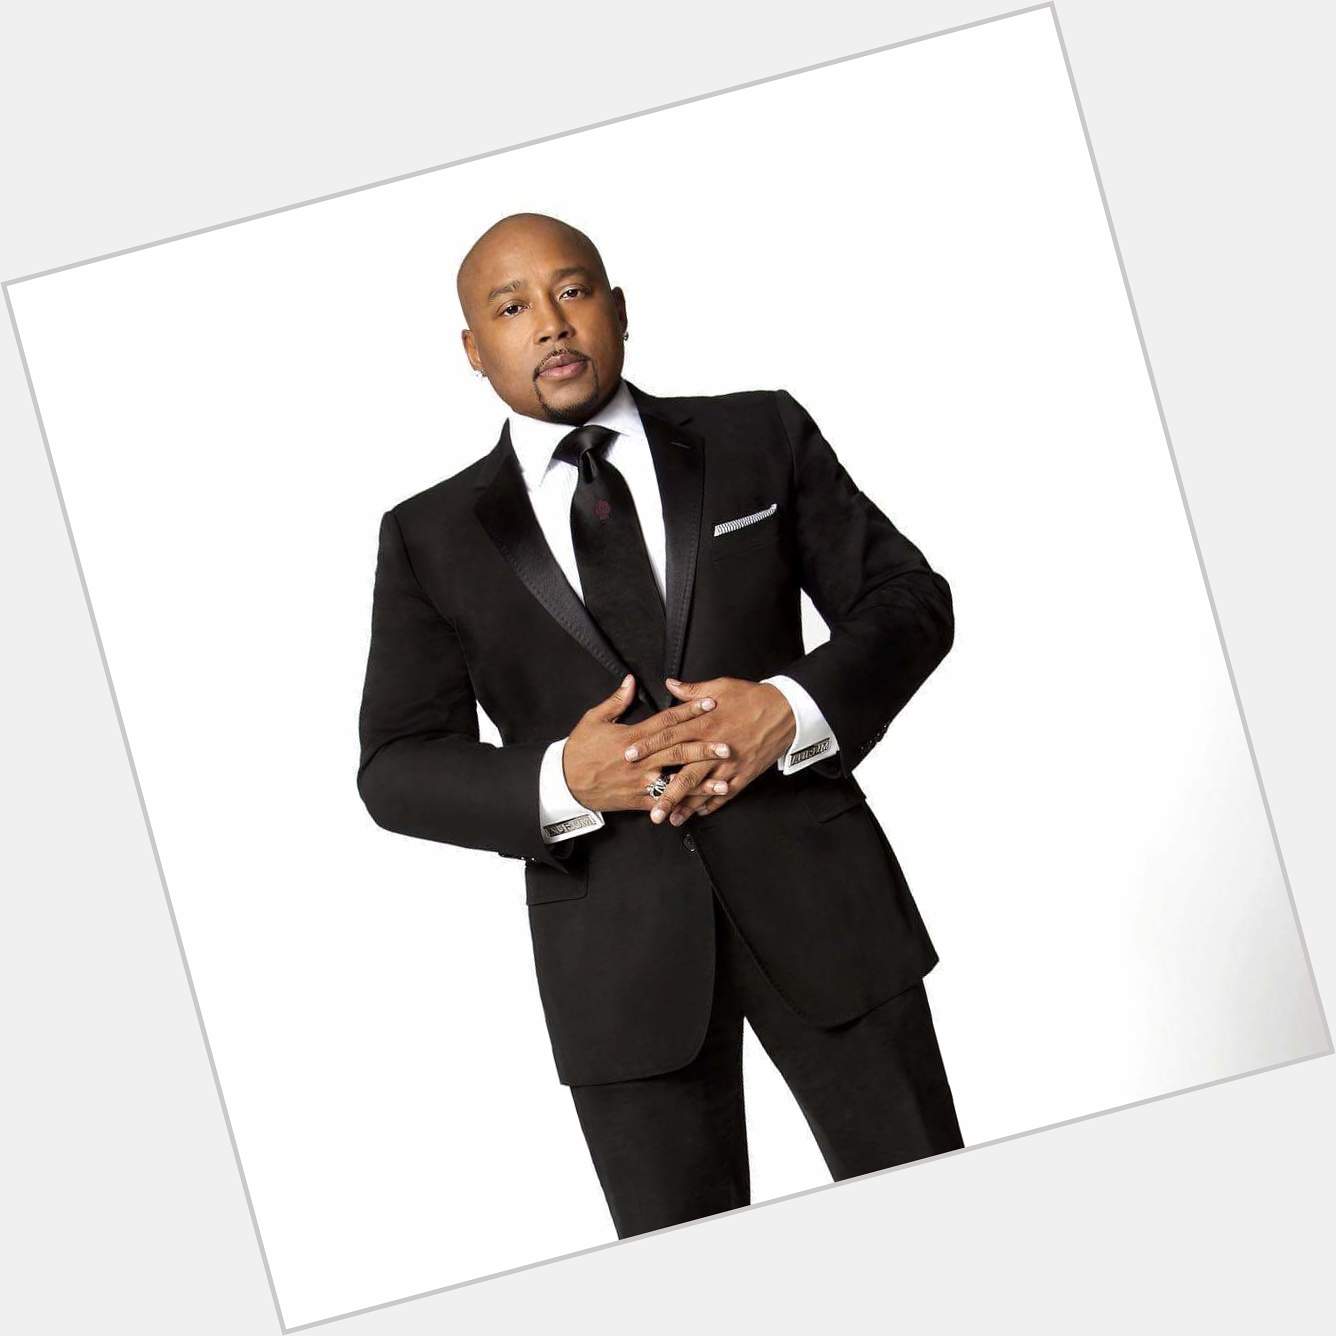 Happy birthday to business and FUBU founder Daymond John! He turned 48 today. 